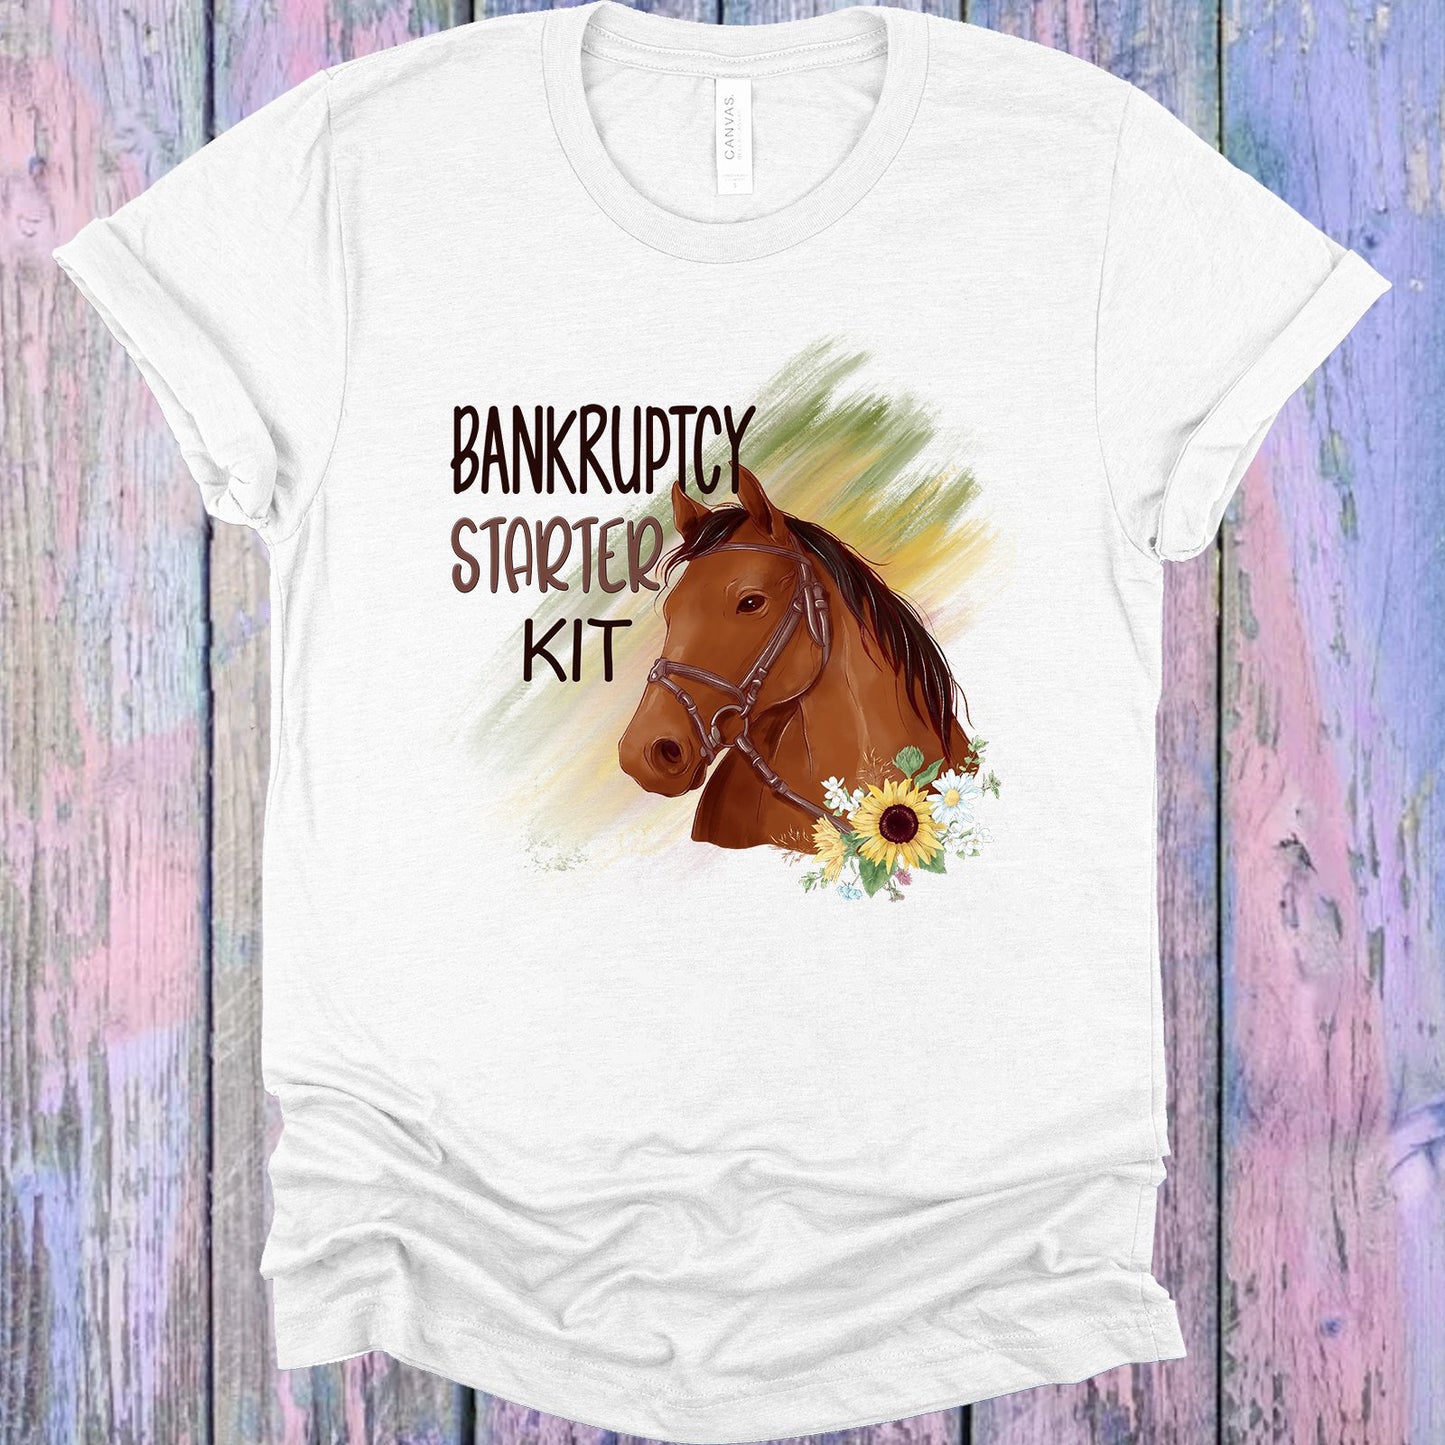 Bankruptcy Starter Kit Graphic Tee Graphic Tee